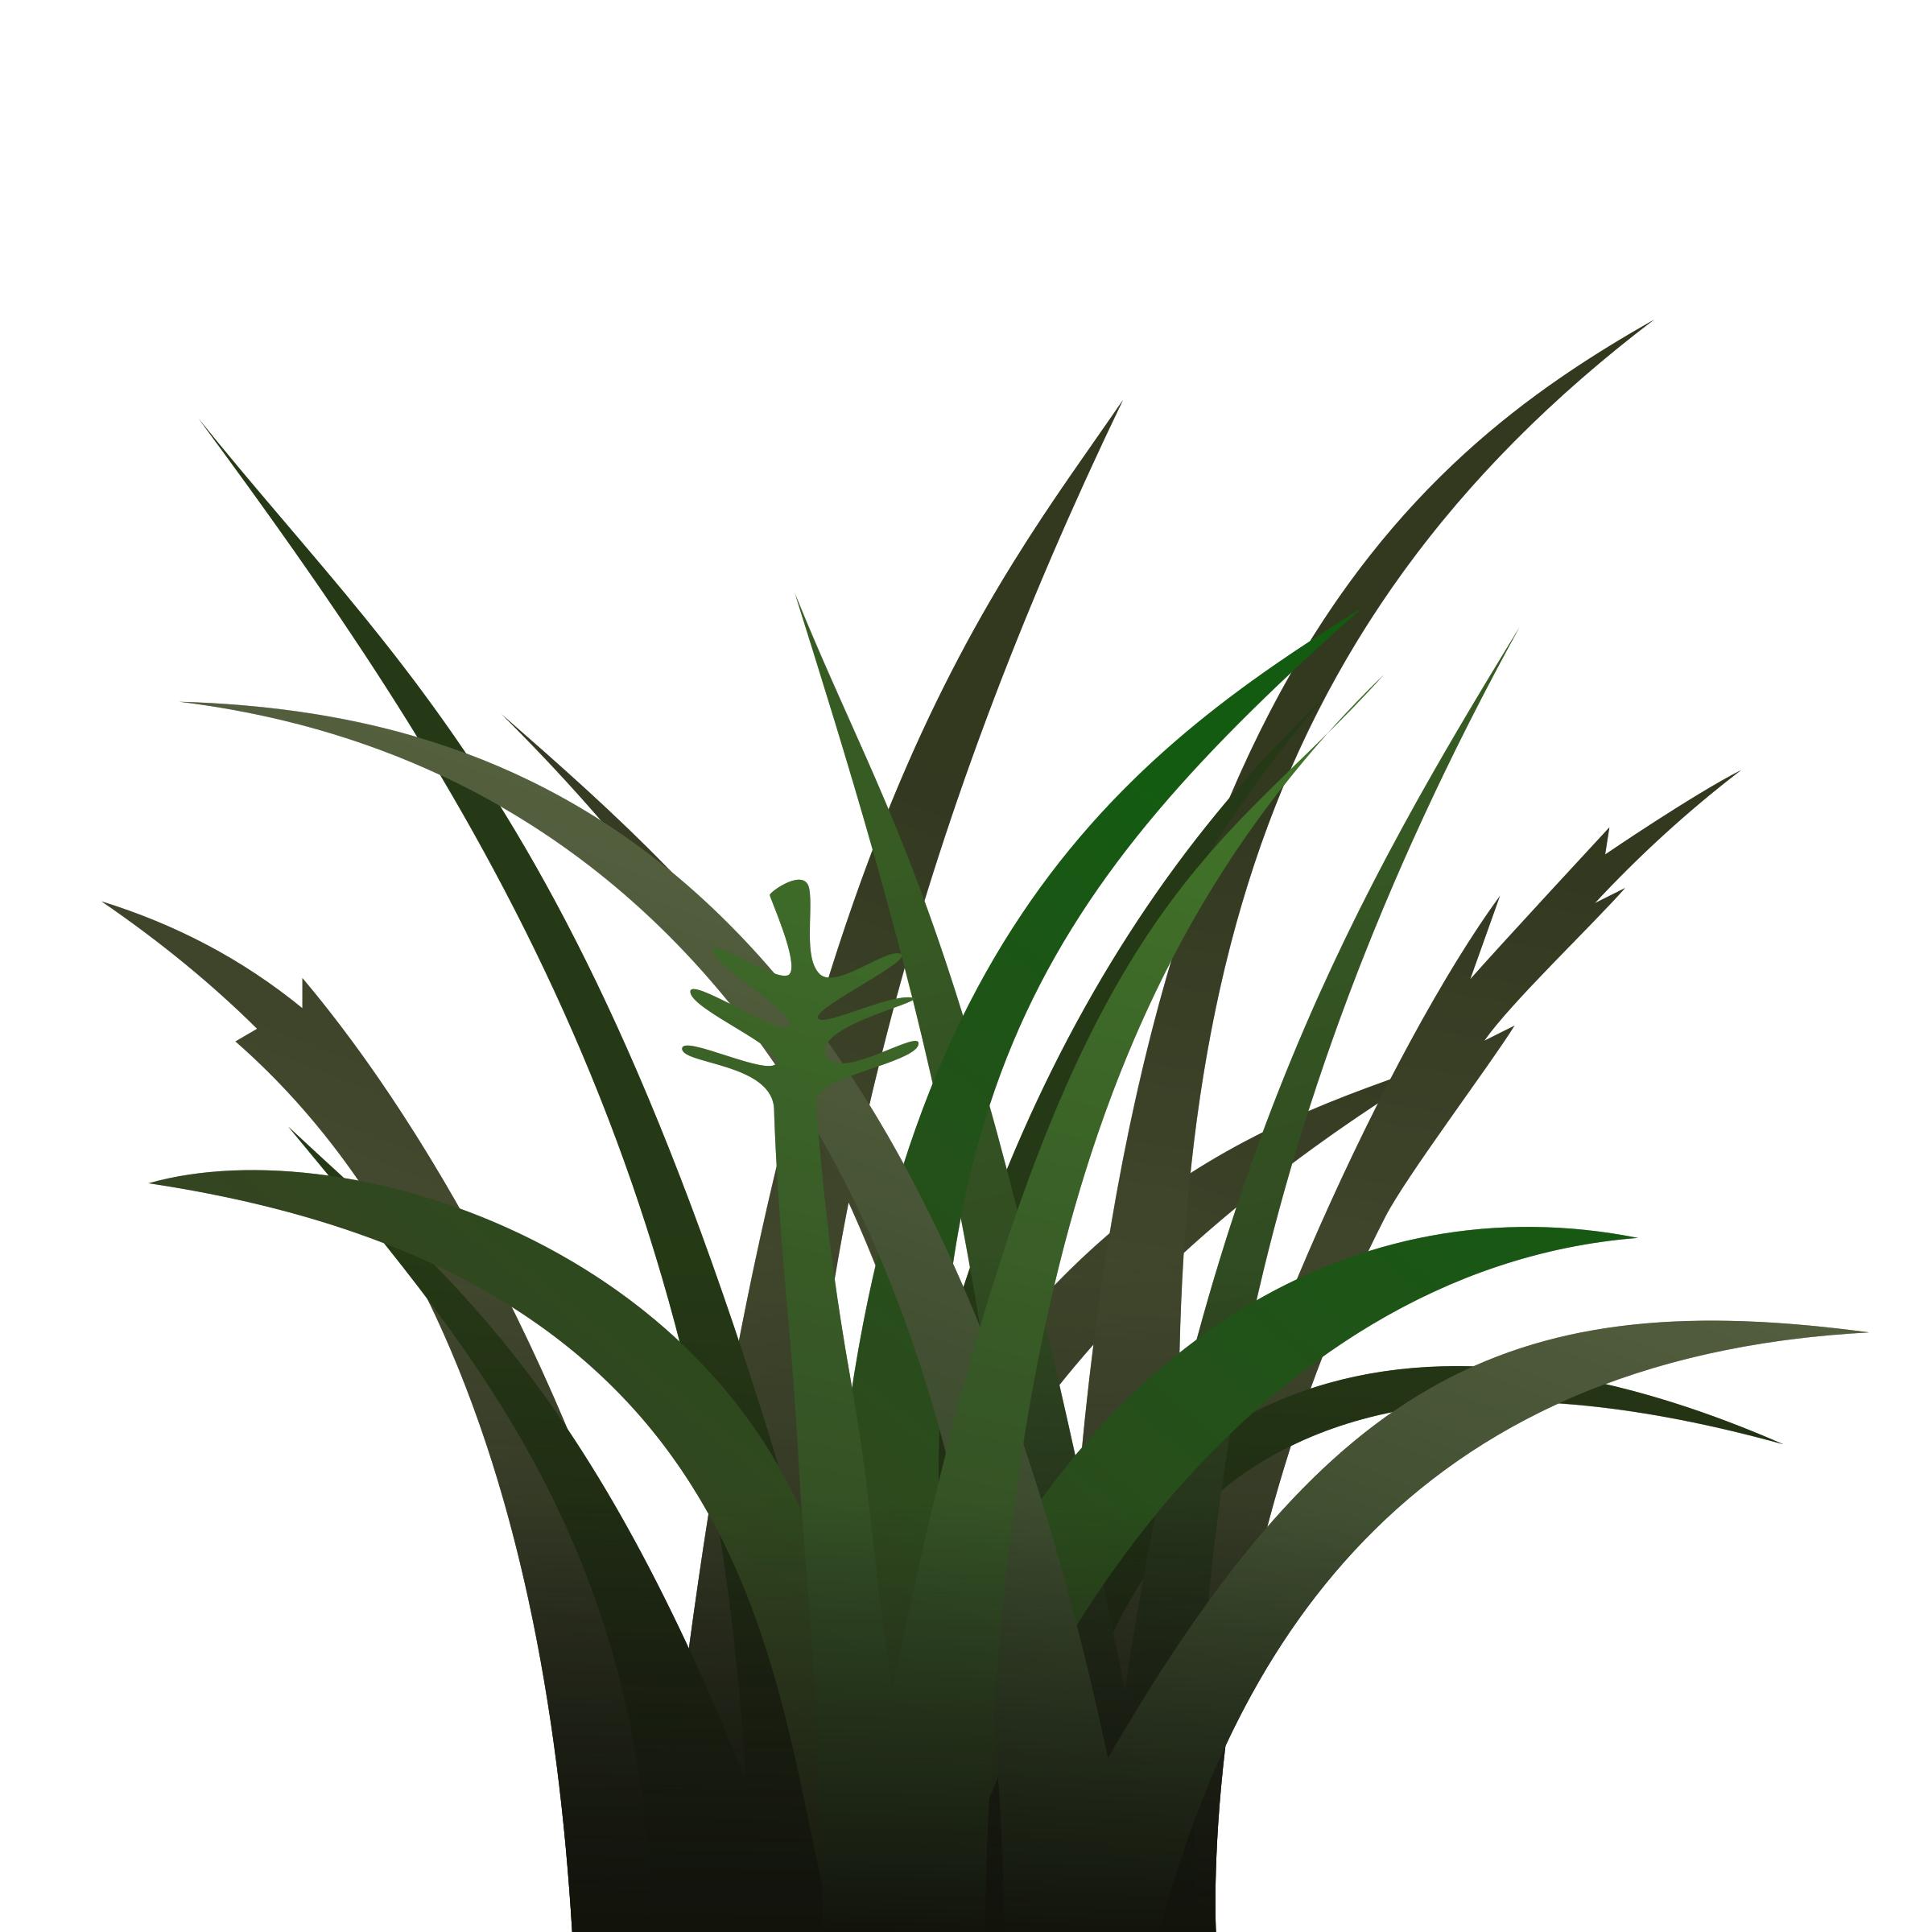 Darker Grass Shaded png